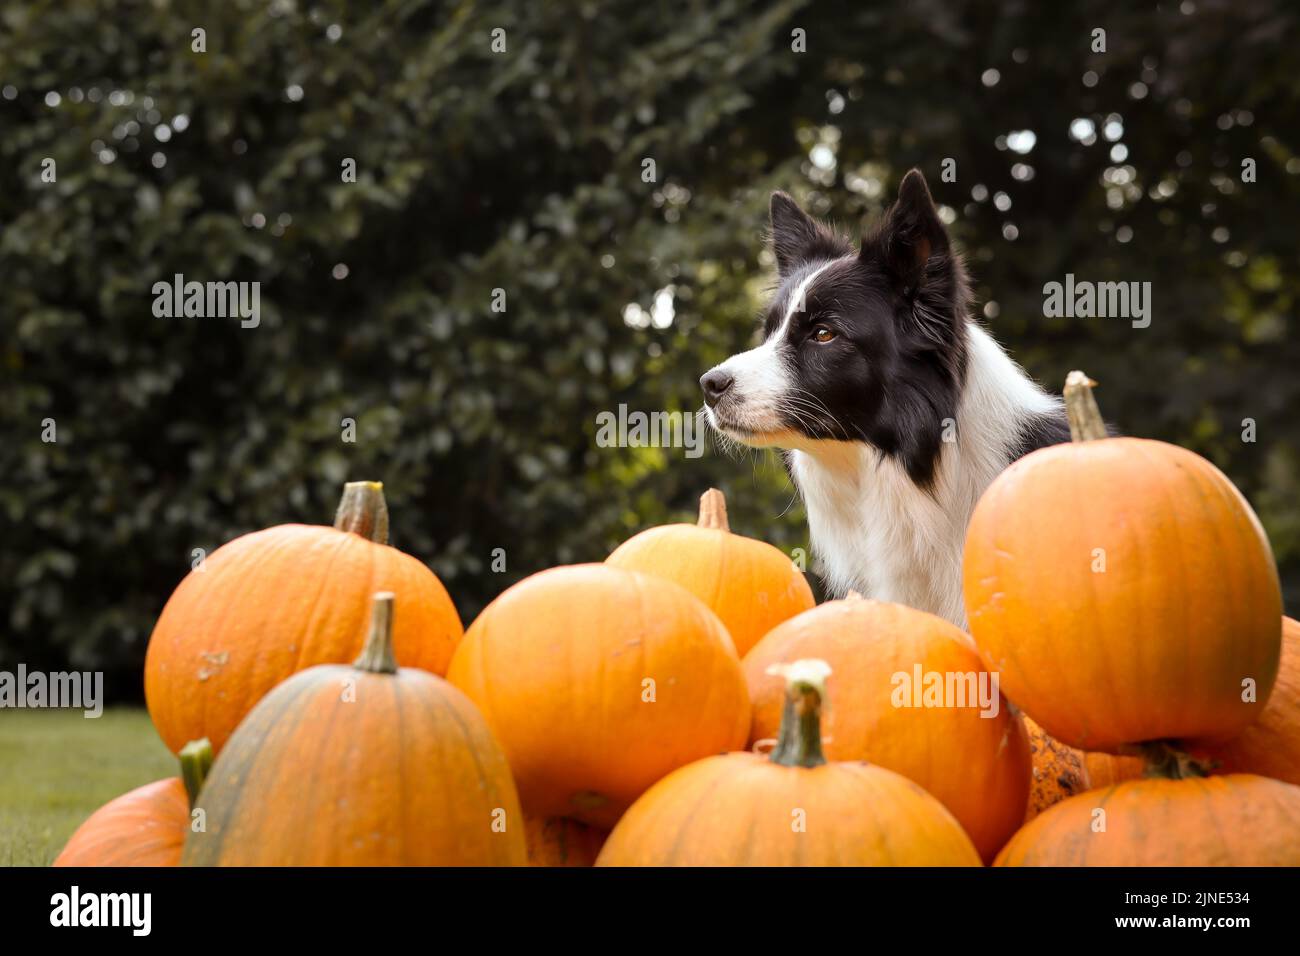 Side Portrait of Border Collie with Orange Pumpkins. Adorable Black and White Dog with Pumpkin Patch in the Garden. Stock Photo